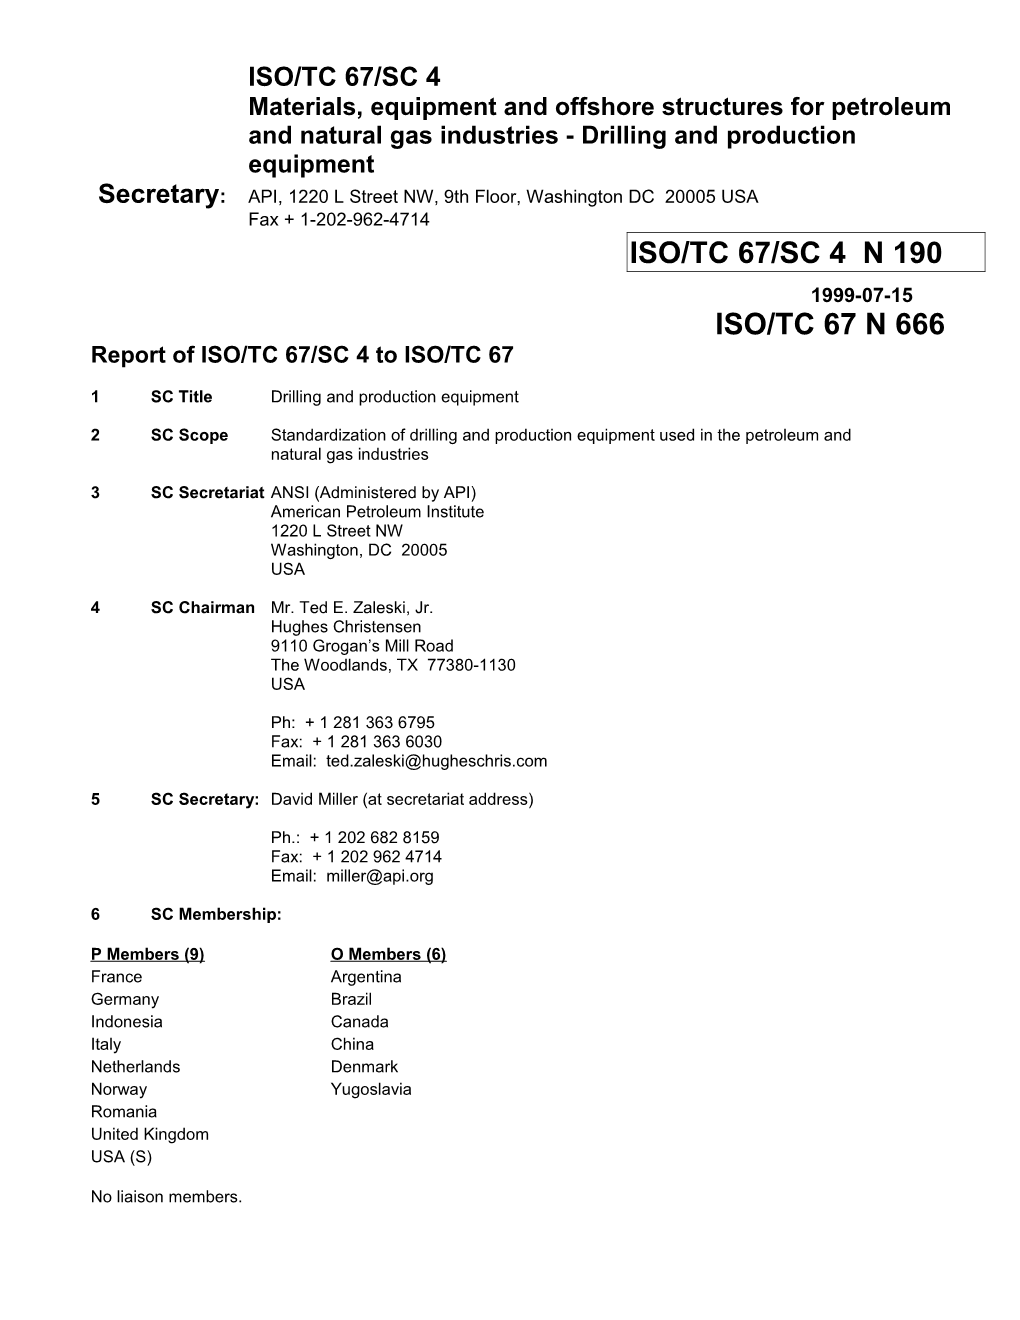 Report of ISO/TC 67/SC 4 to the ISO/TC 67 Plenary Meeting 1999-07-15